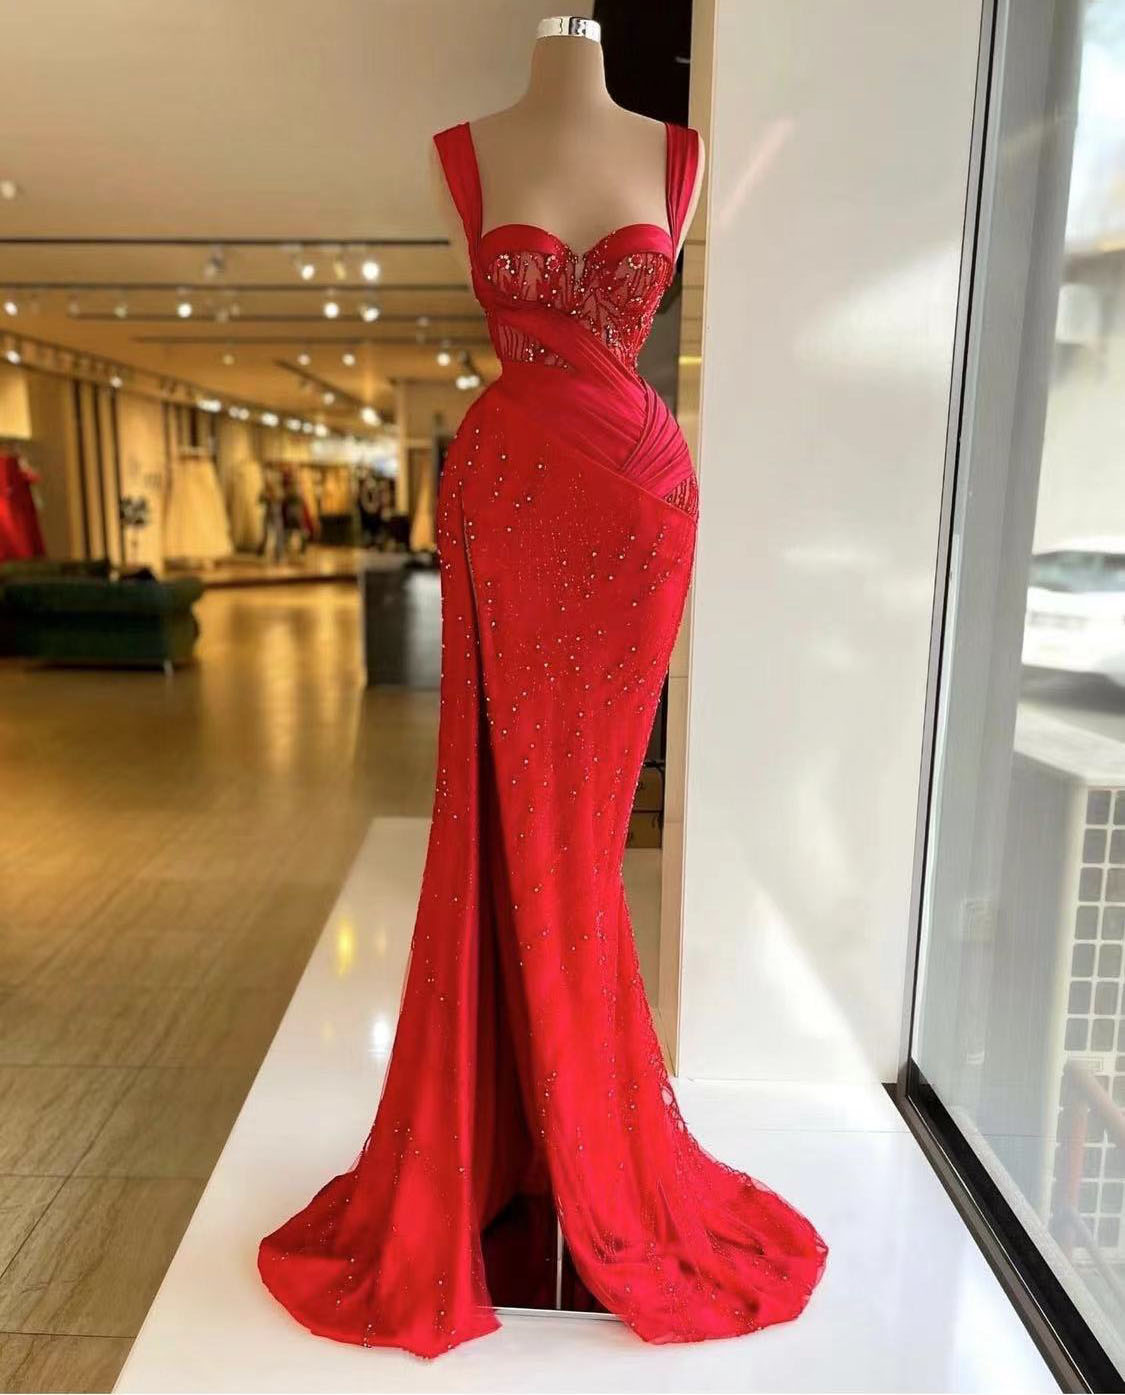 Red Prom Dresses, Lace Prom Dresses, Beaded Prom Dresses, Sweetheart ...